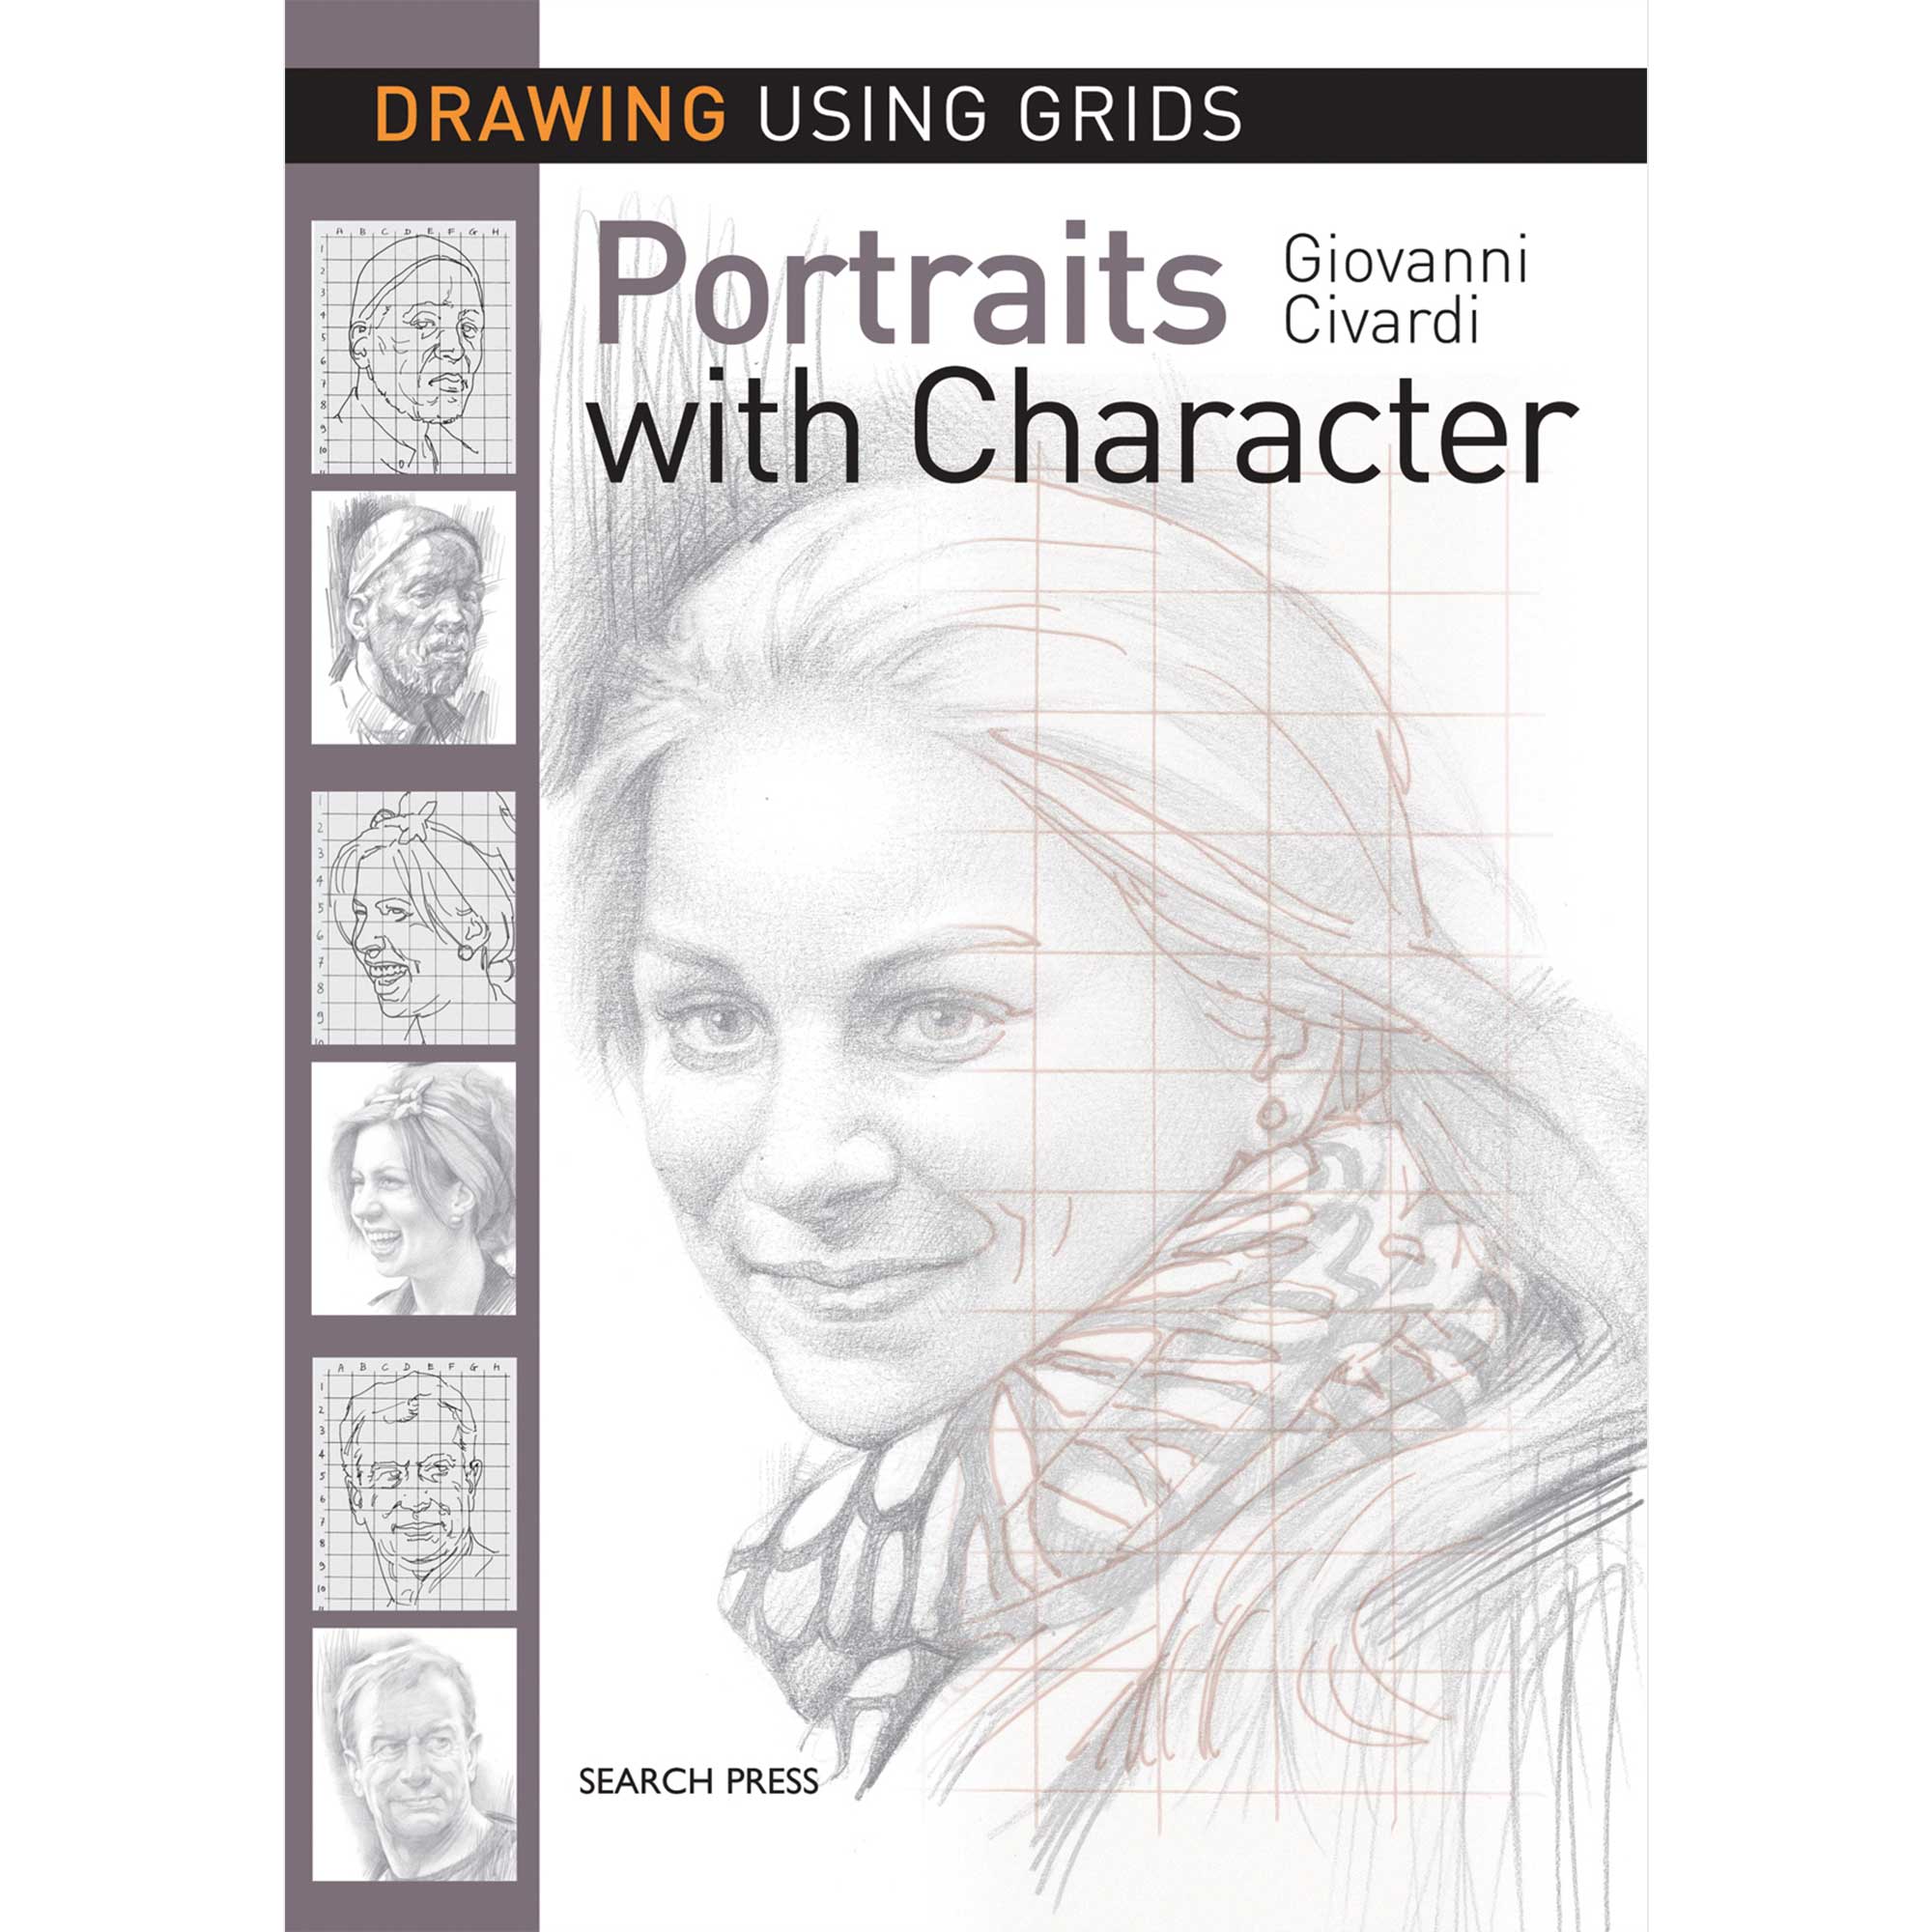 Drawing Using Grids: Portraits with Character - G. Civardi